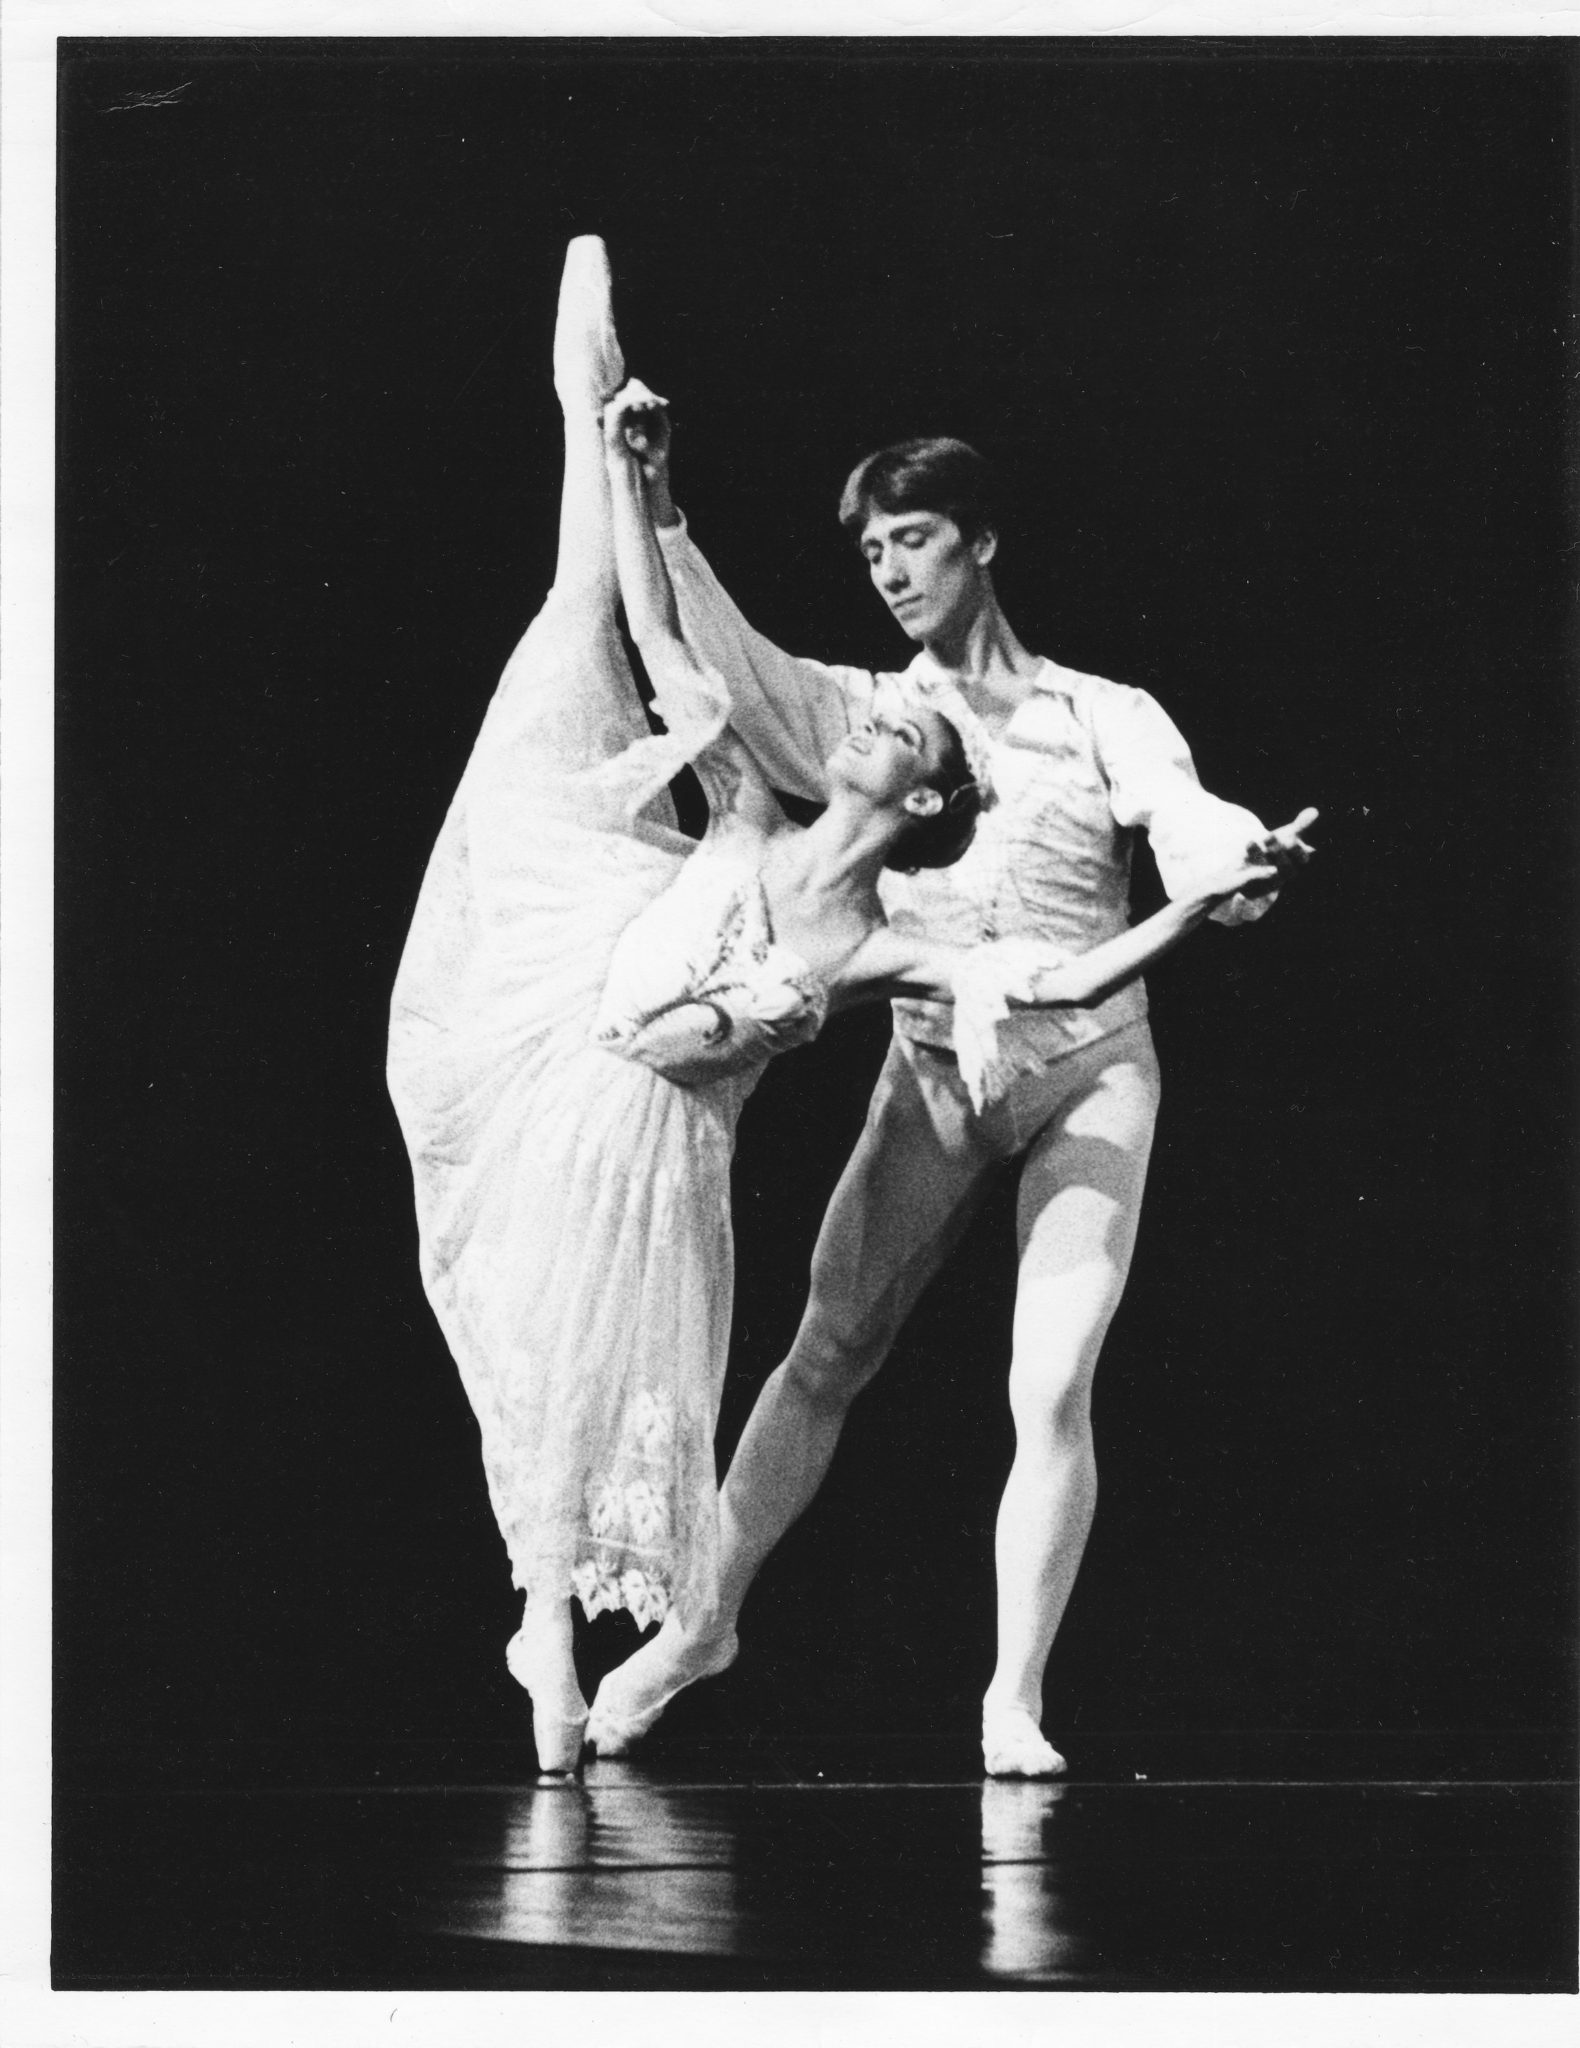 Martine Harley in The Nutcracker 1980, Snow Queen with Sven Toorvald, photo by Steve Mason